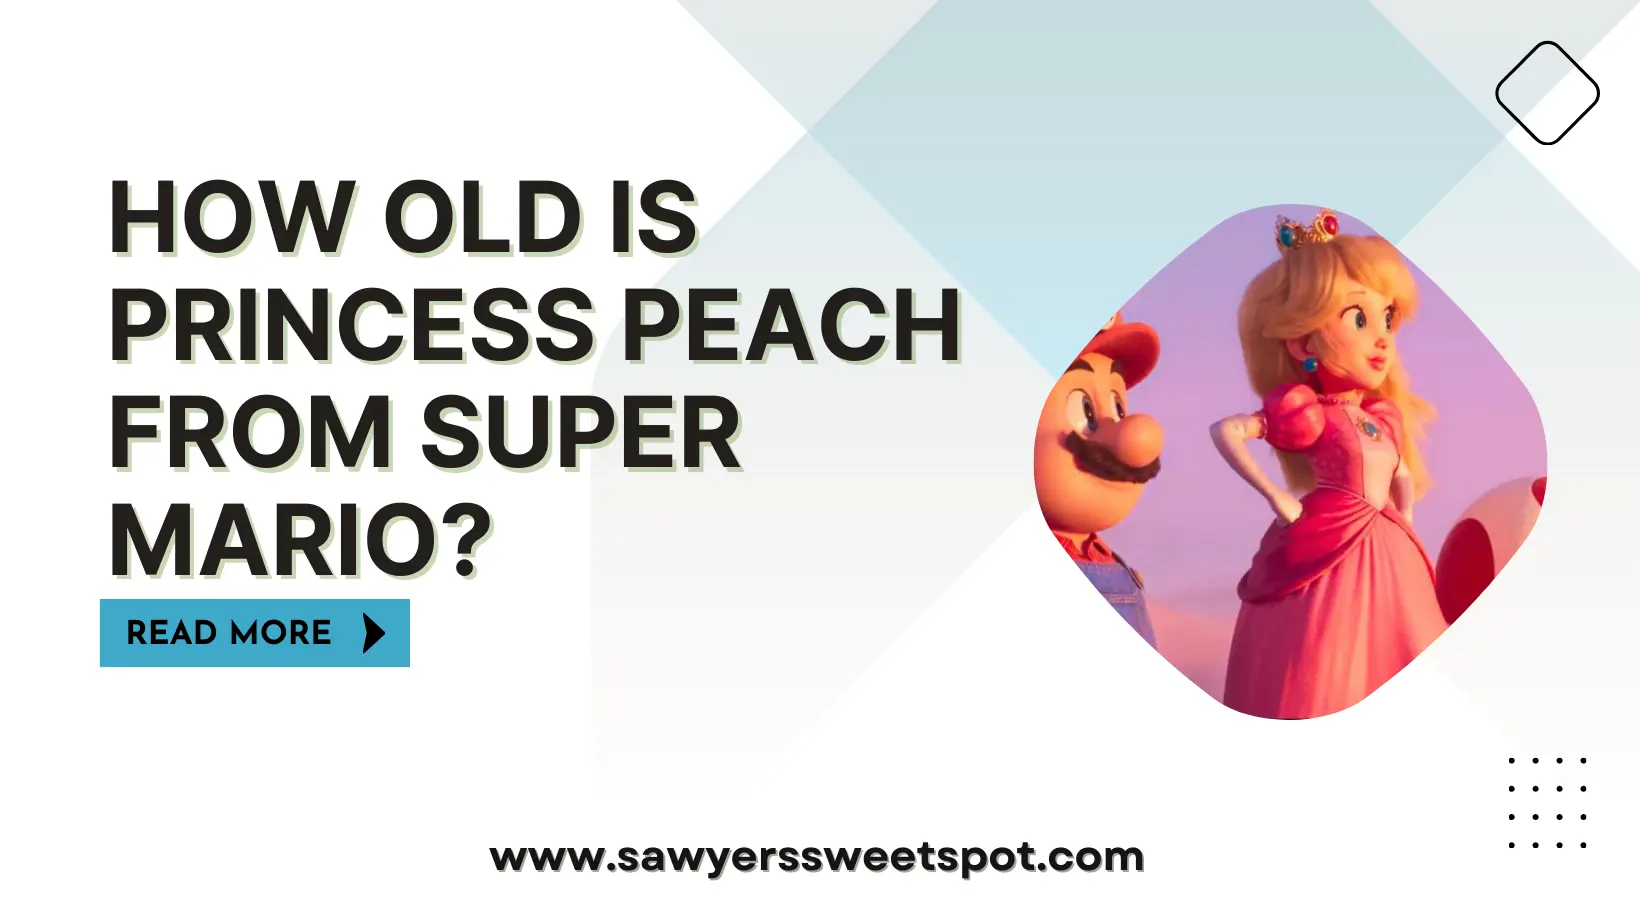 How Old is Princess Peach from Super Mario?